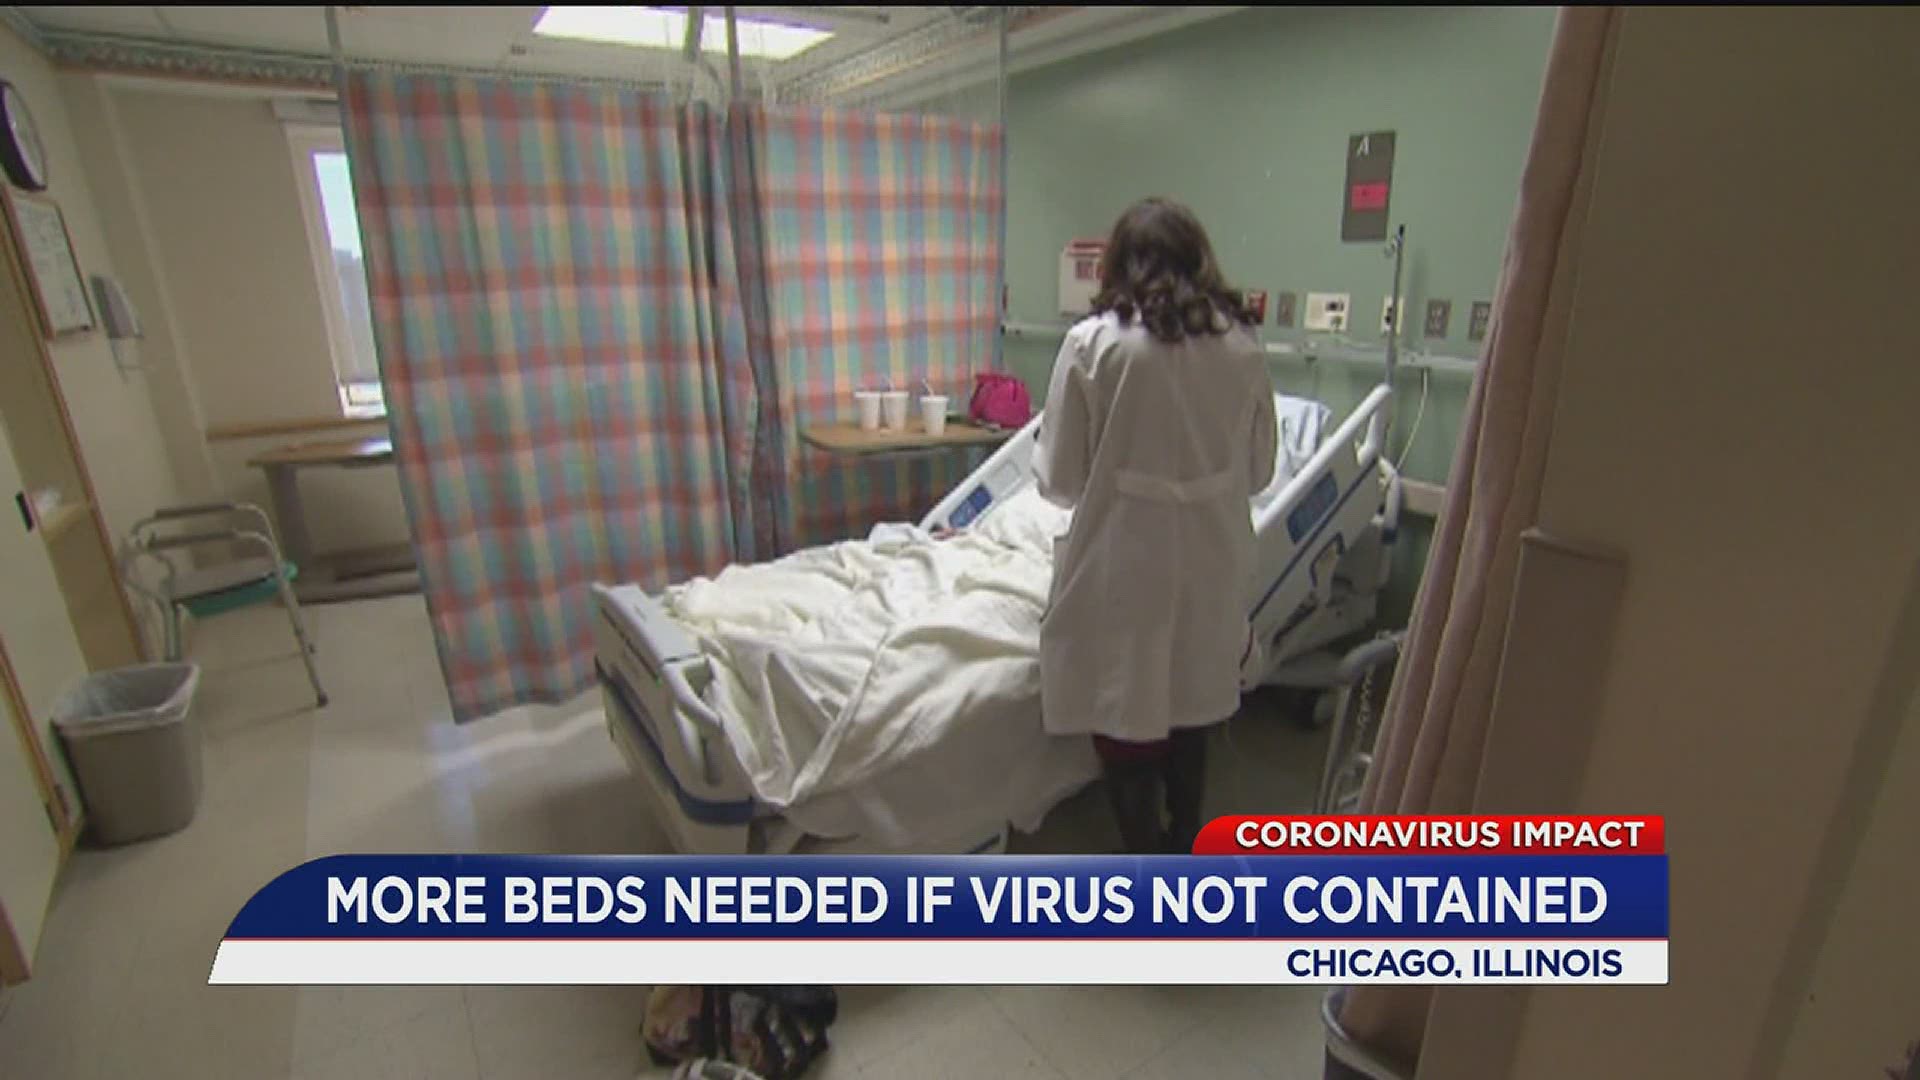 Illinois will need thousands of hospital beds.